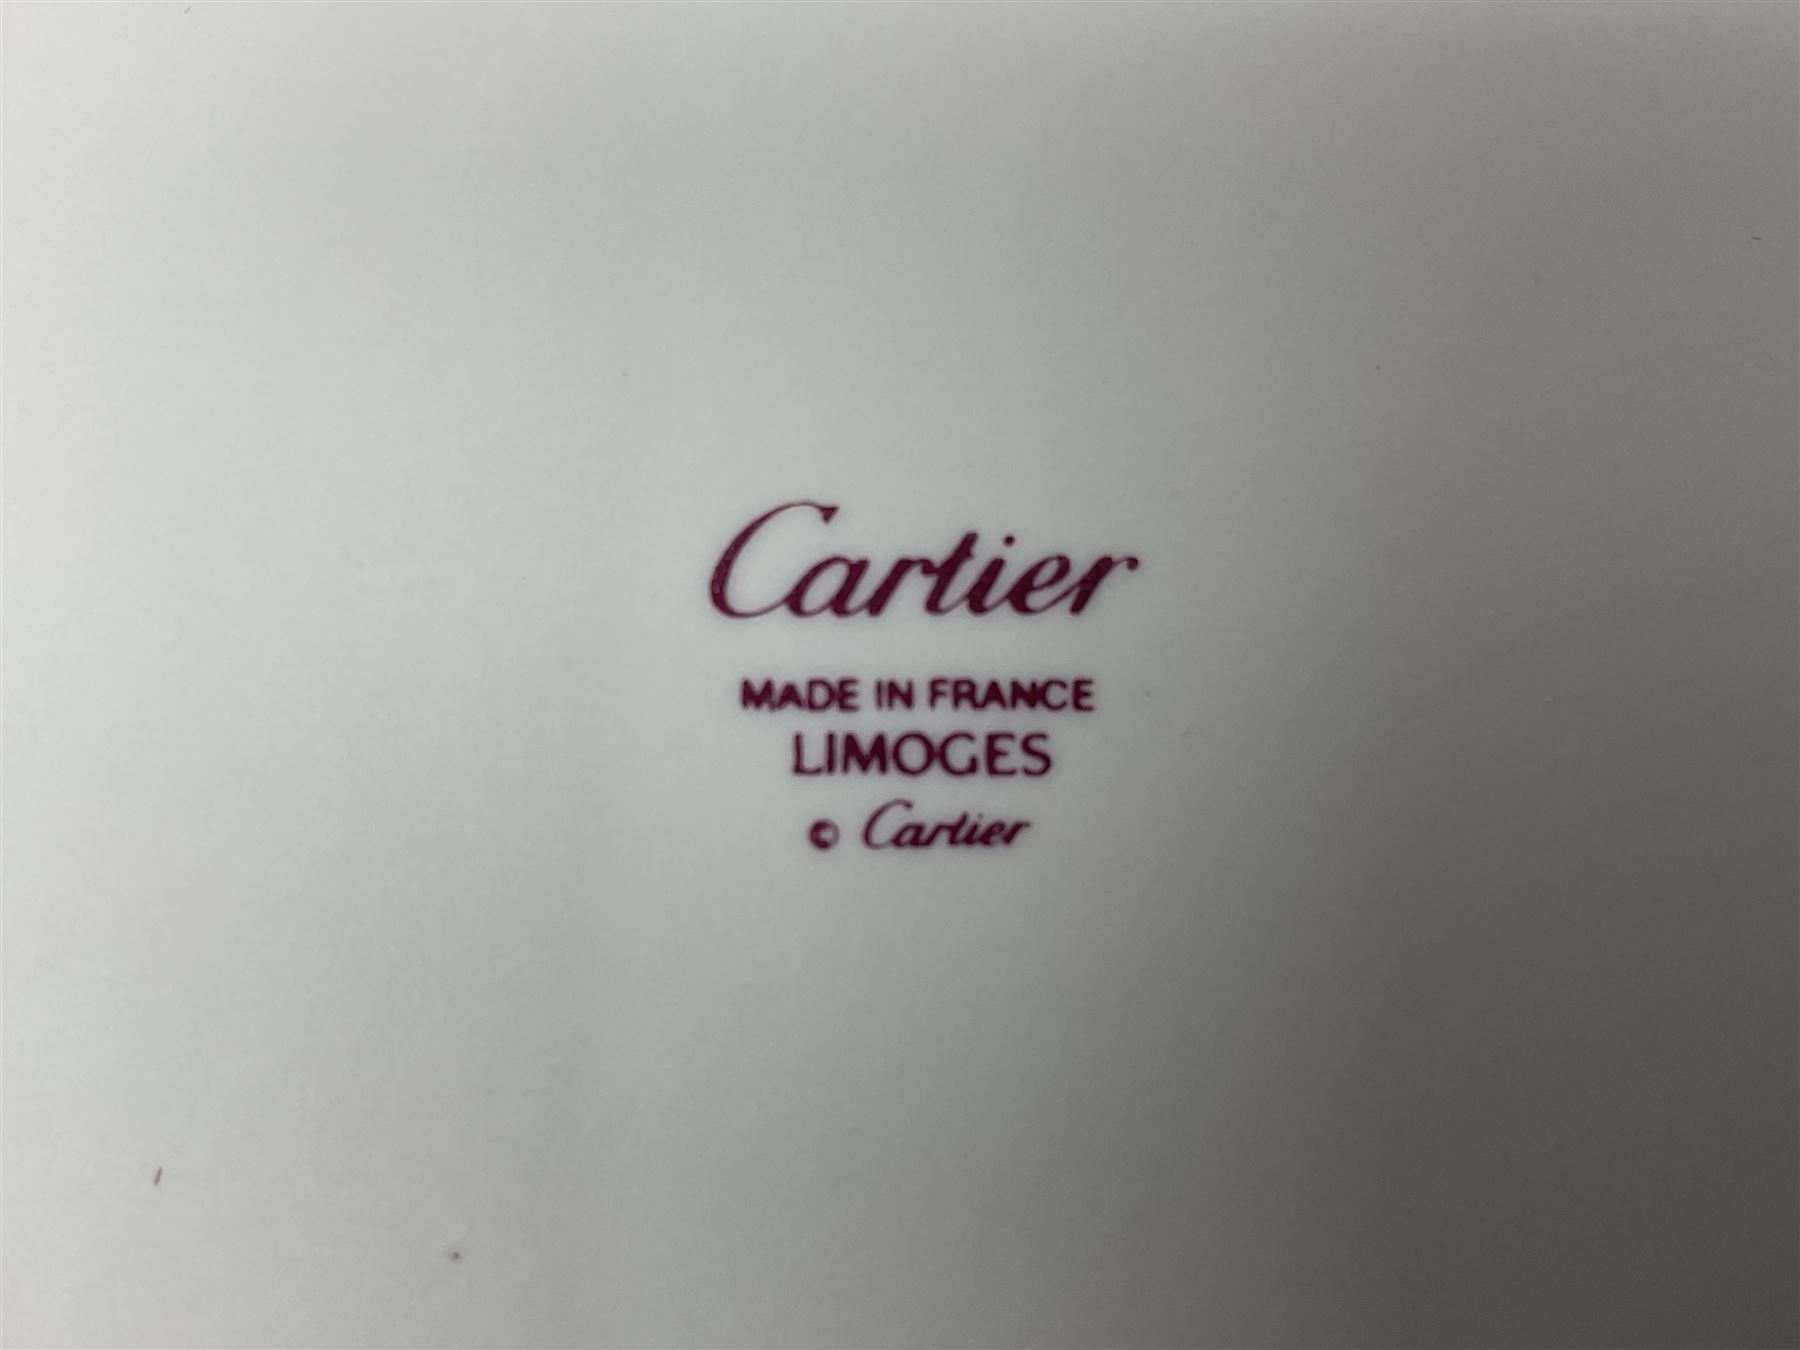 Limoges for Cartier - Image 8 of 11